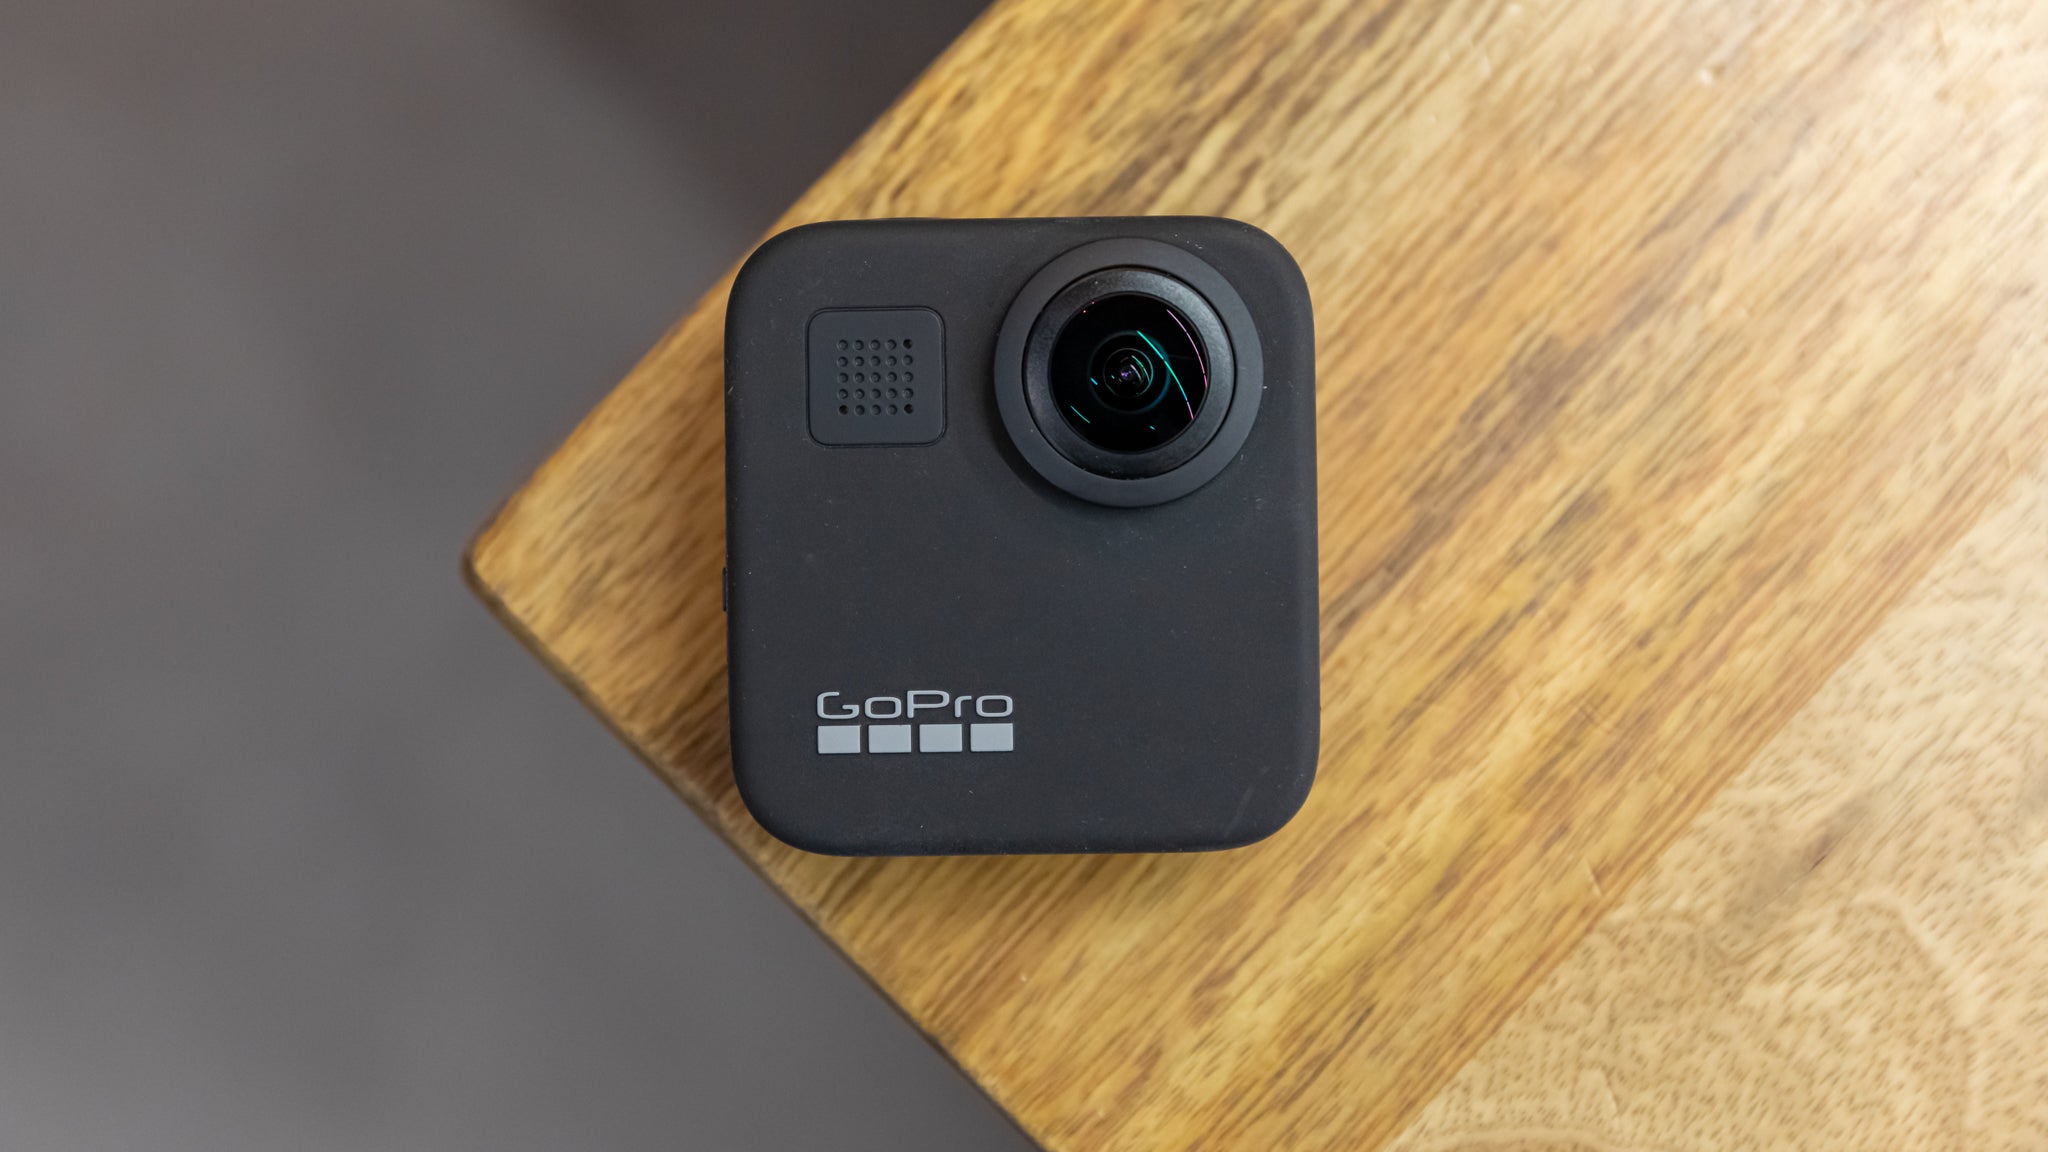 GoPro Max review: A superb 360 action camera that's also easy to